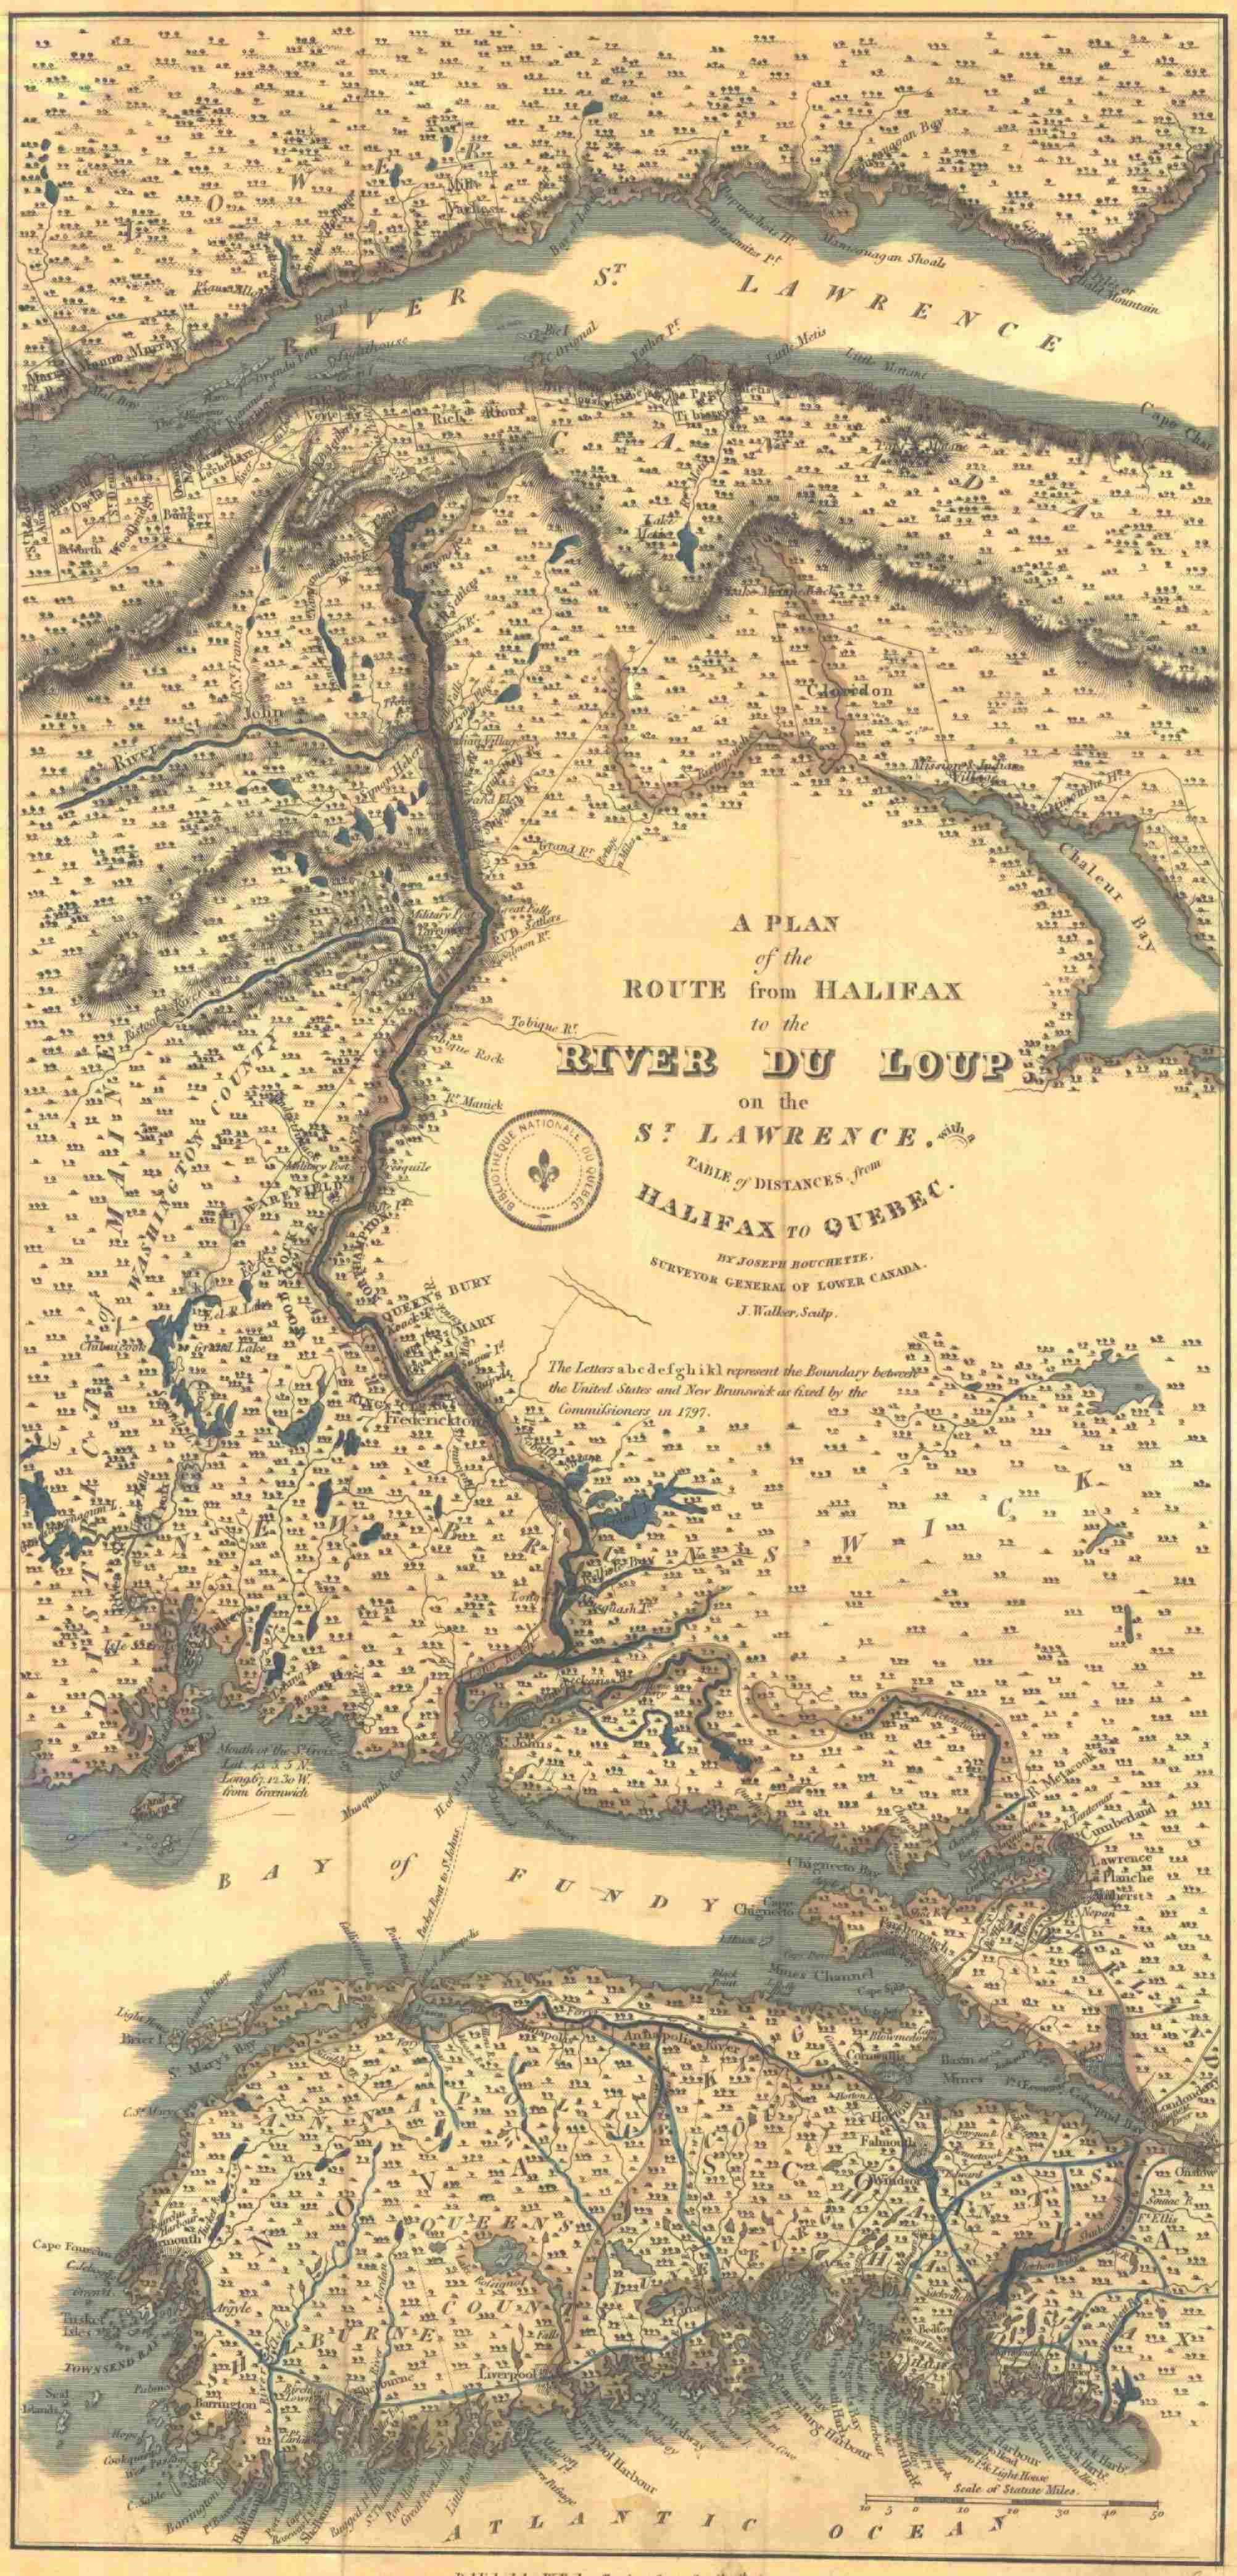 An old English map showing the area between the mouth of the St. Lawrence to the north and the Atlantic Ocean to the south.